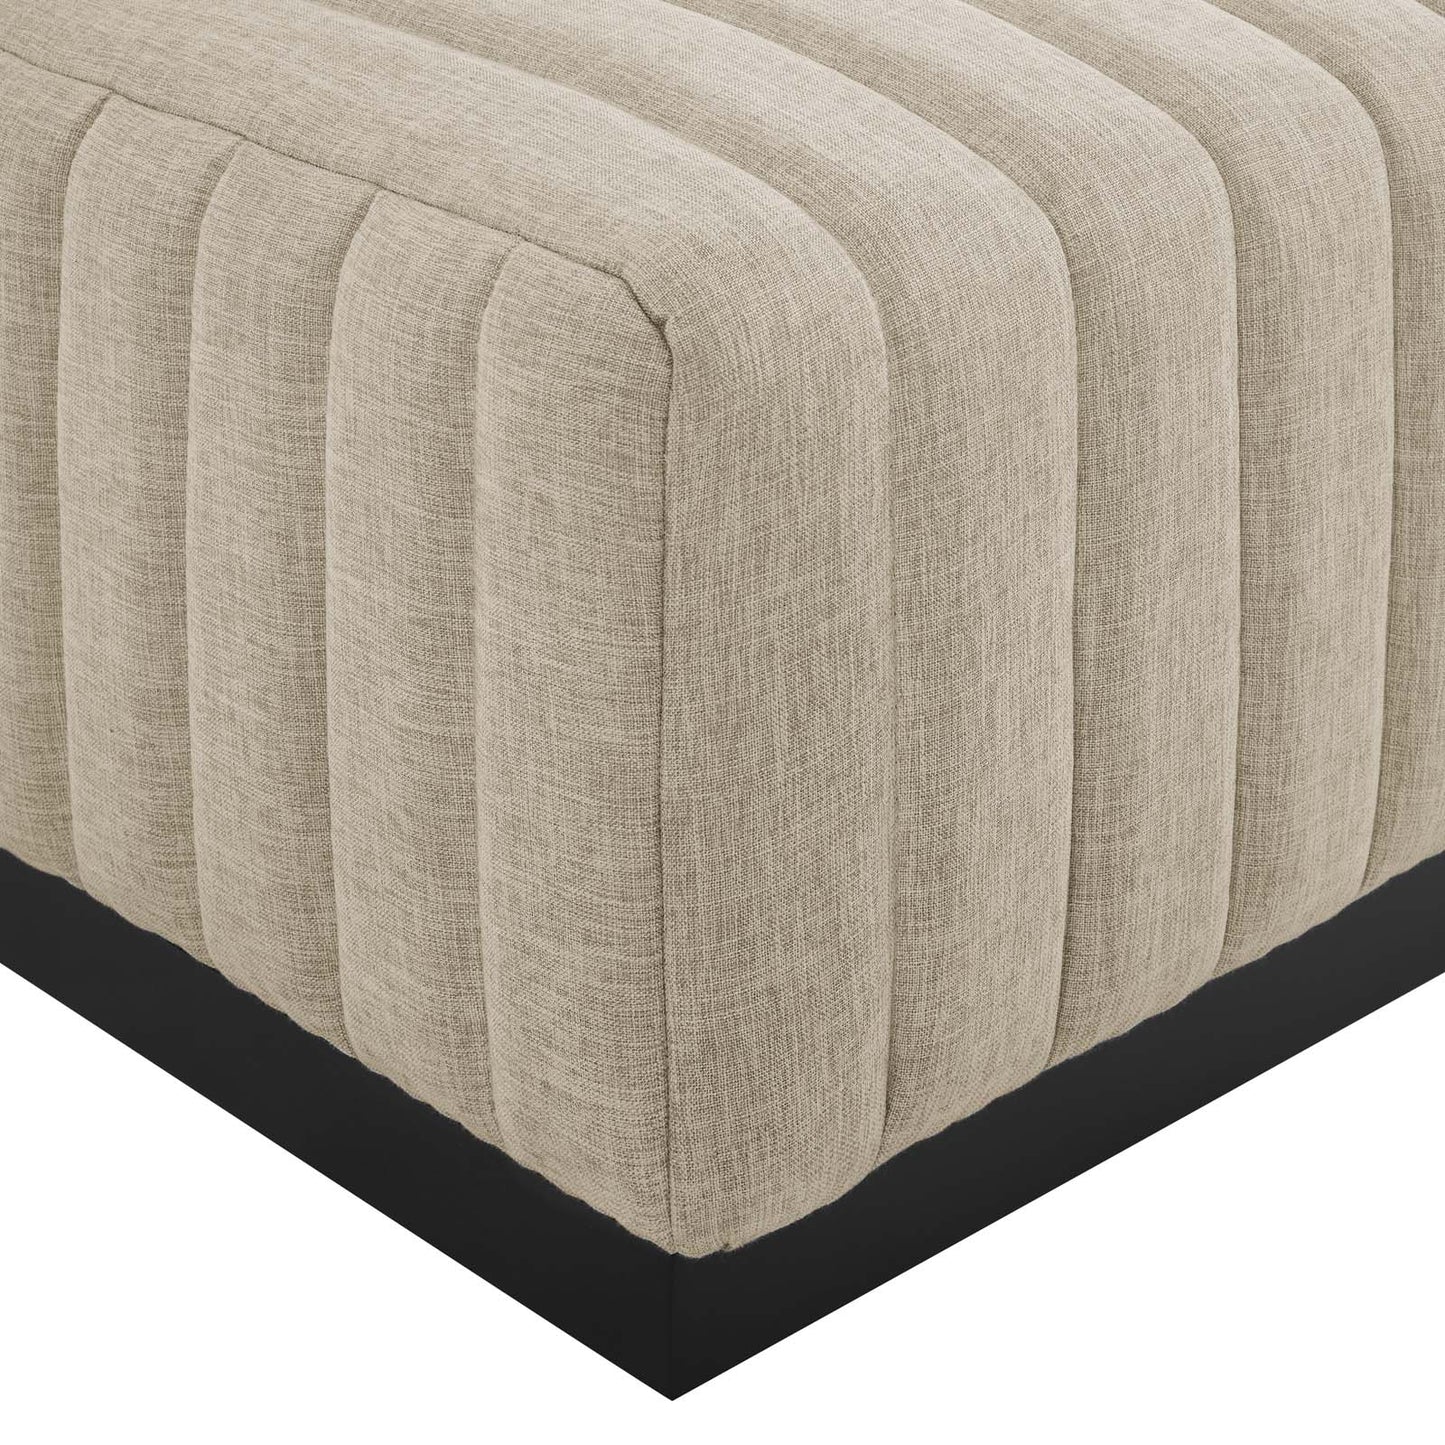 Conjure Channel Tufted Upholstered Fabric Ottoman Black Beige EEI-5501-BLK-BEI